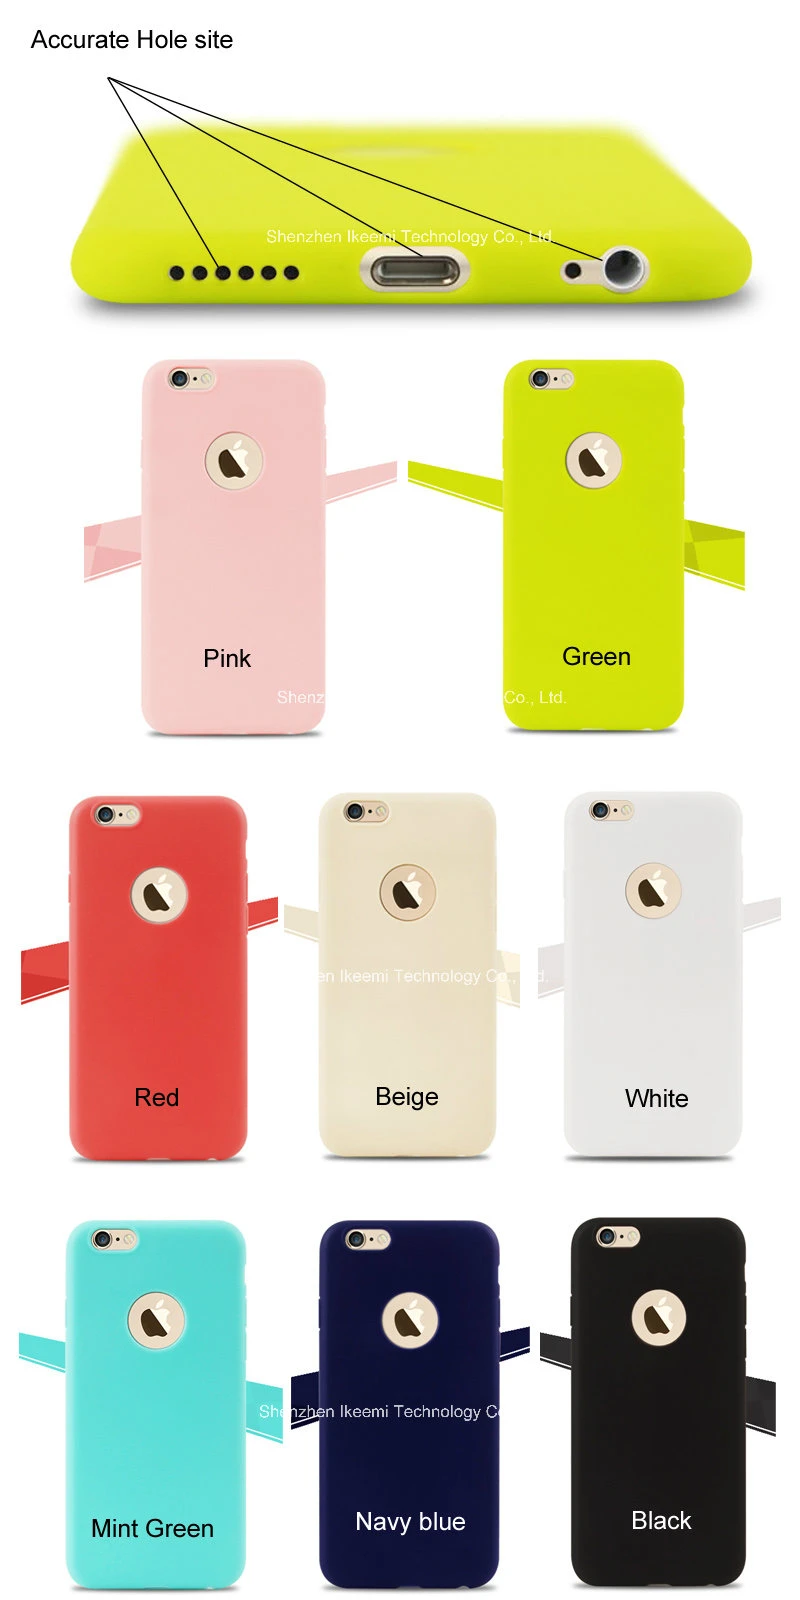 Candy Color Soft TPU Silicon Mobile Cases for iPhone 6/6s, iPhone 6 Plus/6s Plus